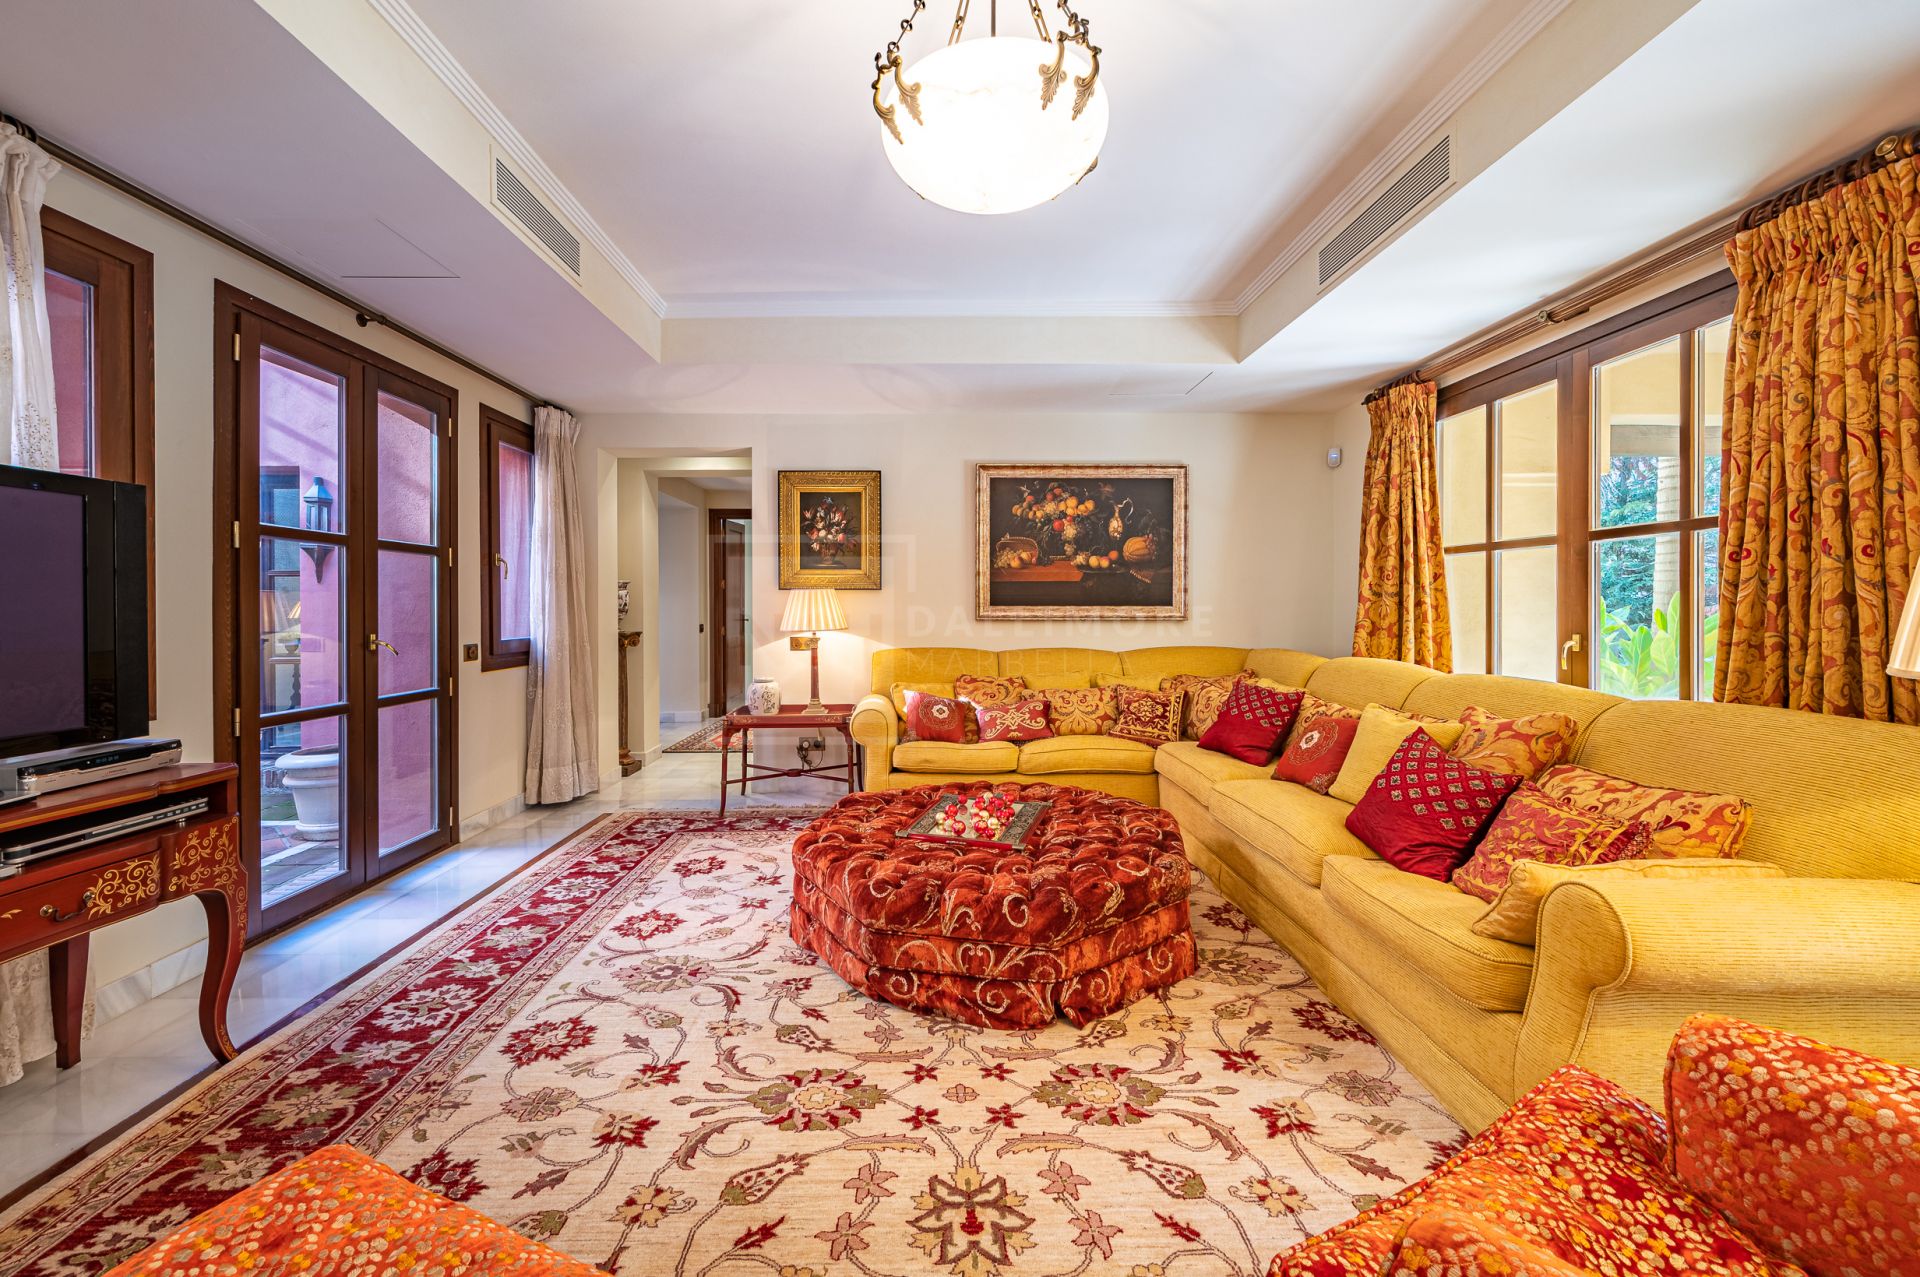 AN ABSOLUTE FIND: CLASSIC 4-BEDROOM ANDALUSIAN STYLE VILLA IN PUERTO BANUS, MARBELLA